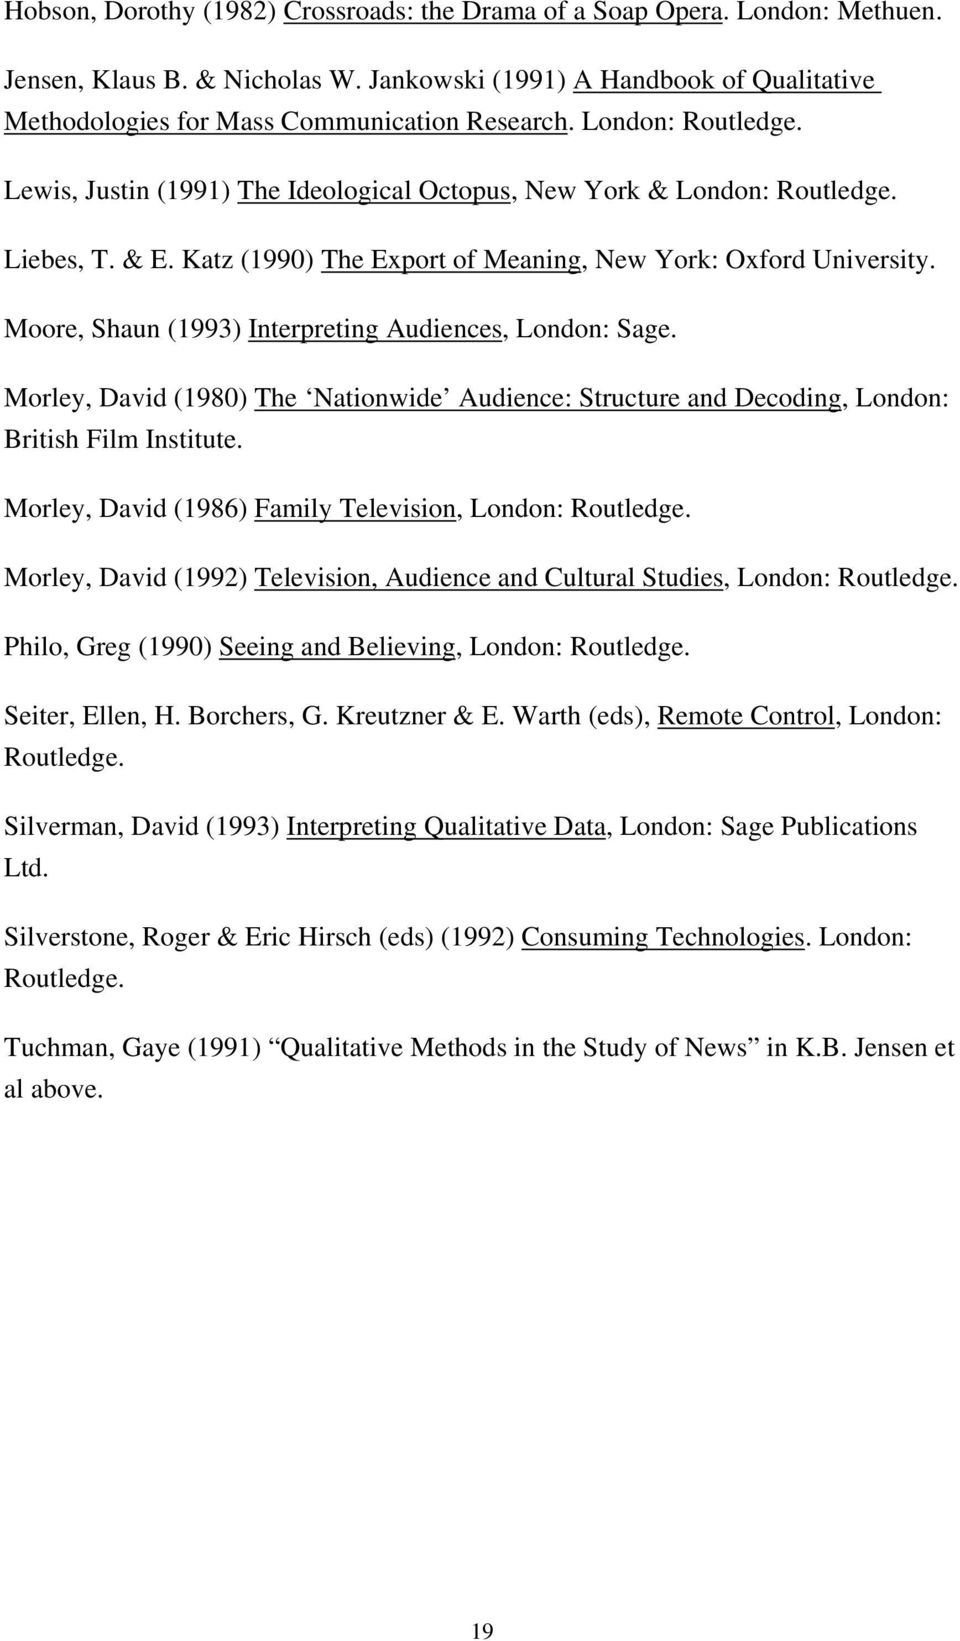 Moore, Shaun (1993) Interpreting Audiences, London: Sage. Morley, David (1980) The Nationwide Audience: Structure and Decoding, London: British Film Institute.